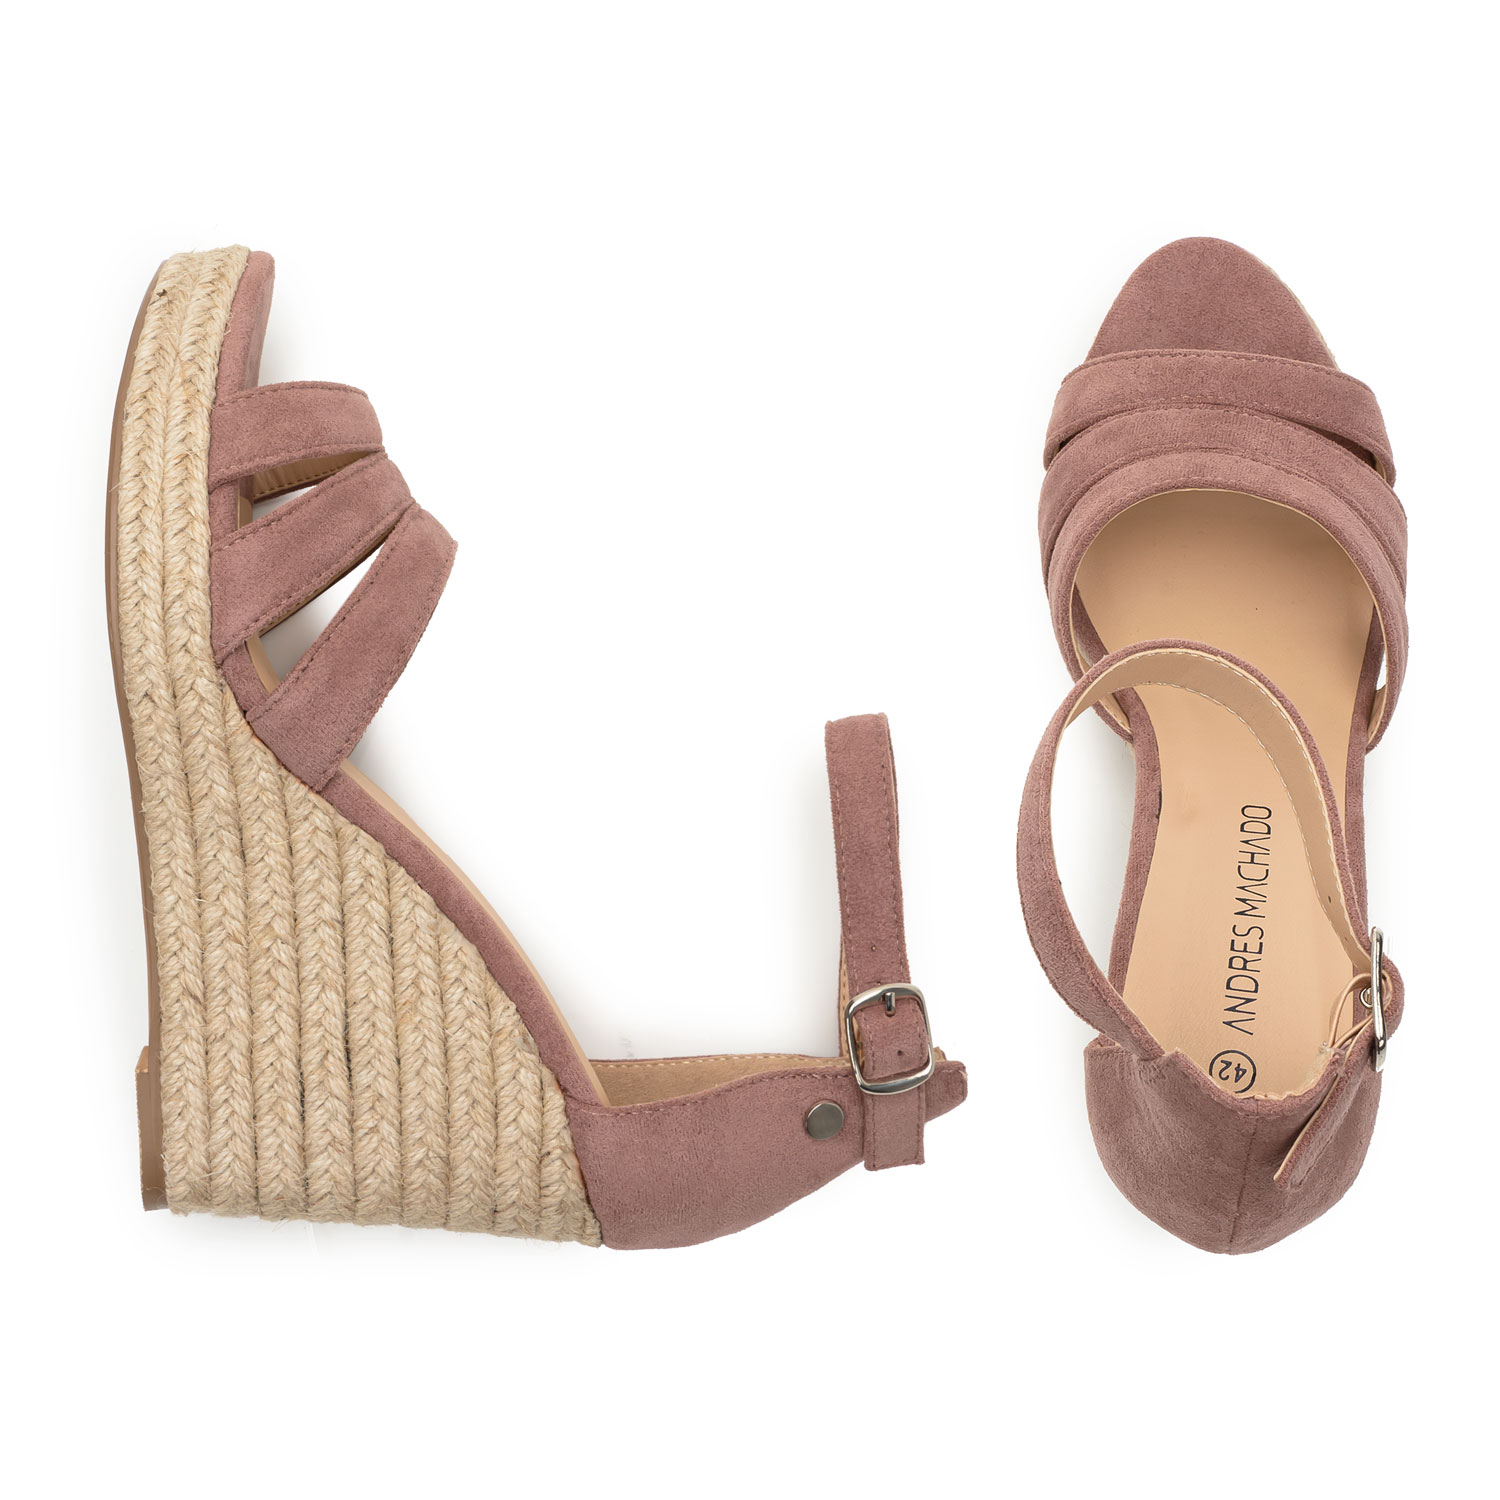 Nude Faux Suede Espadrilles with Jute Wedge 